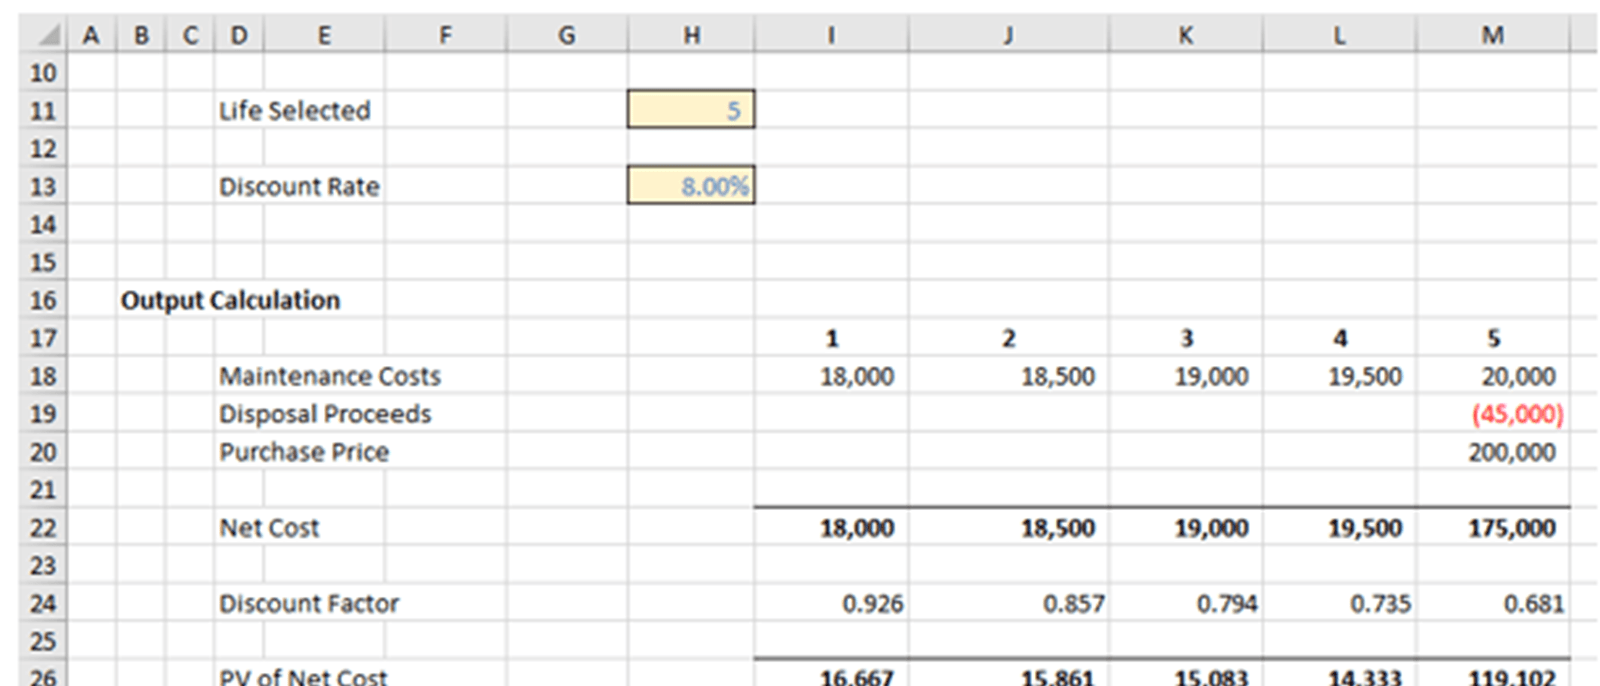 image of 5 years calculation of net present value